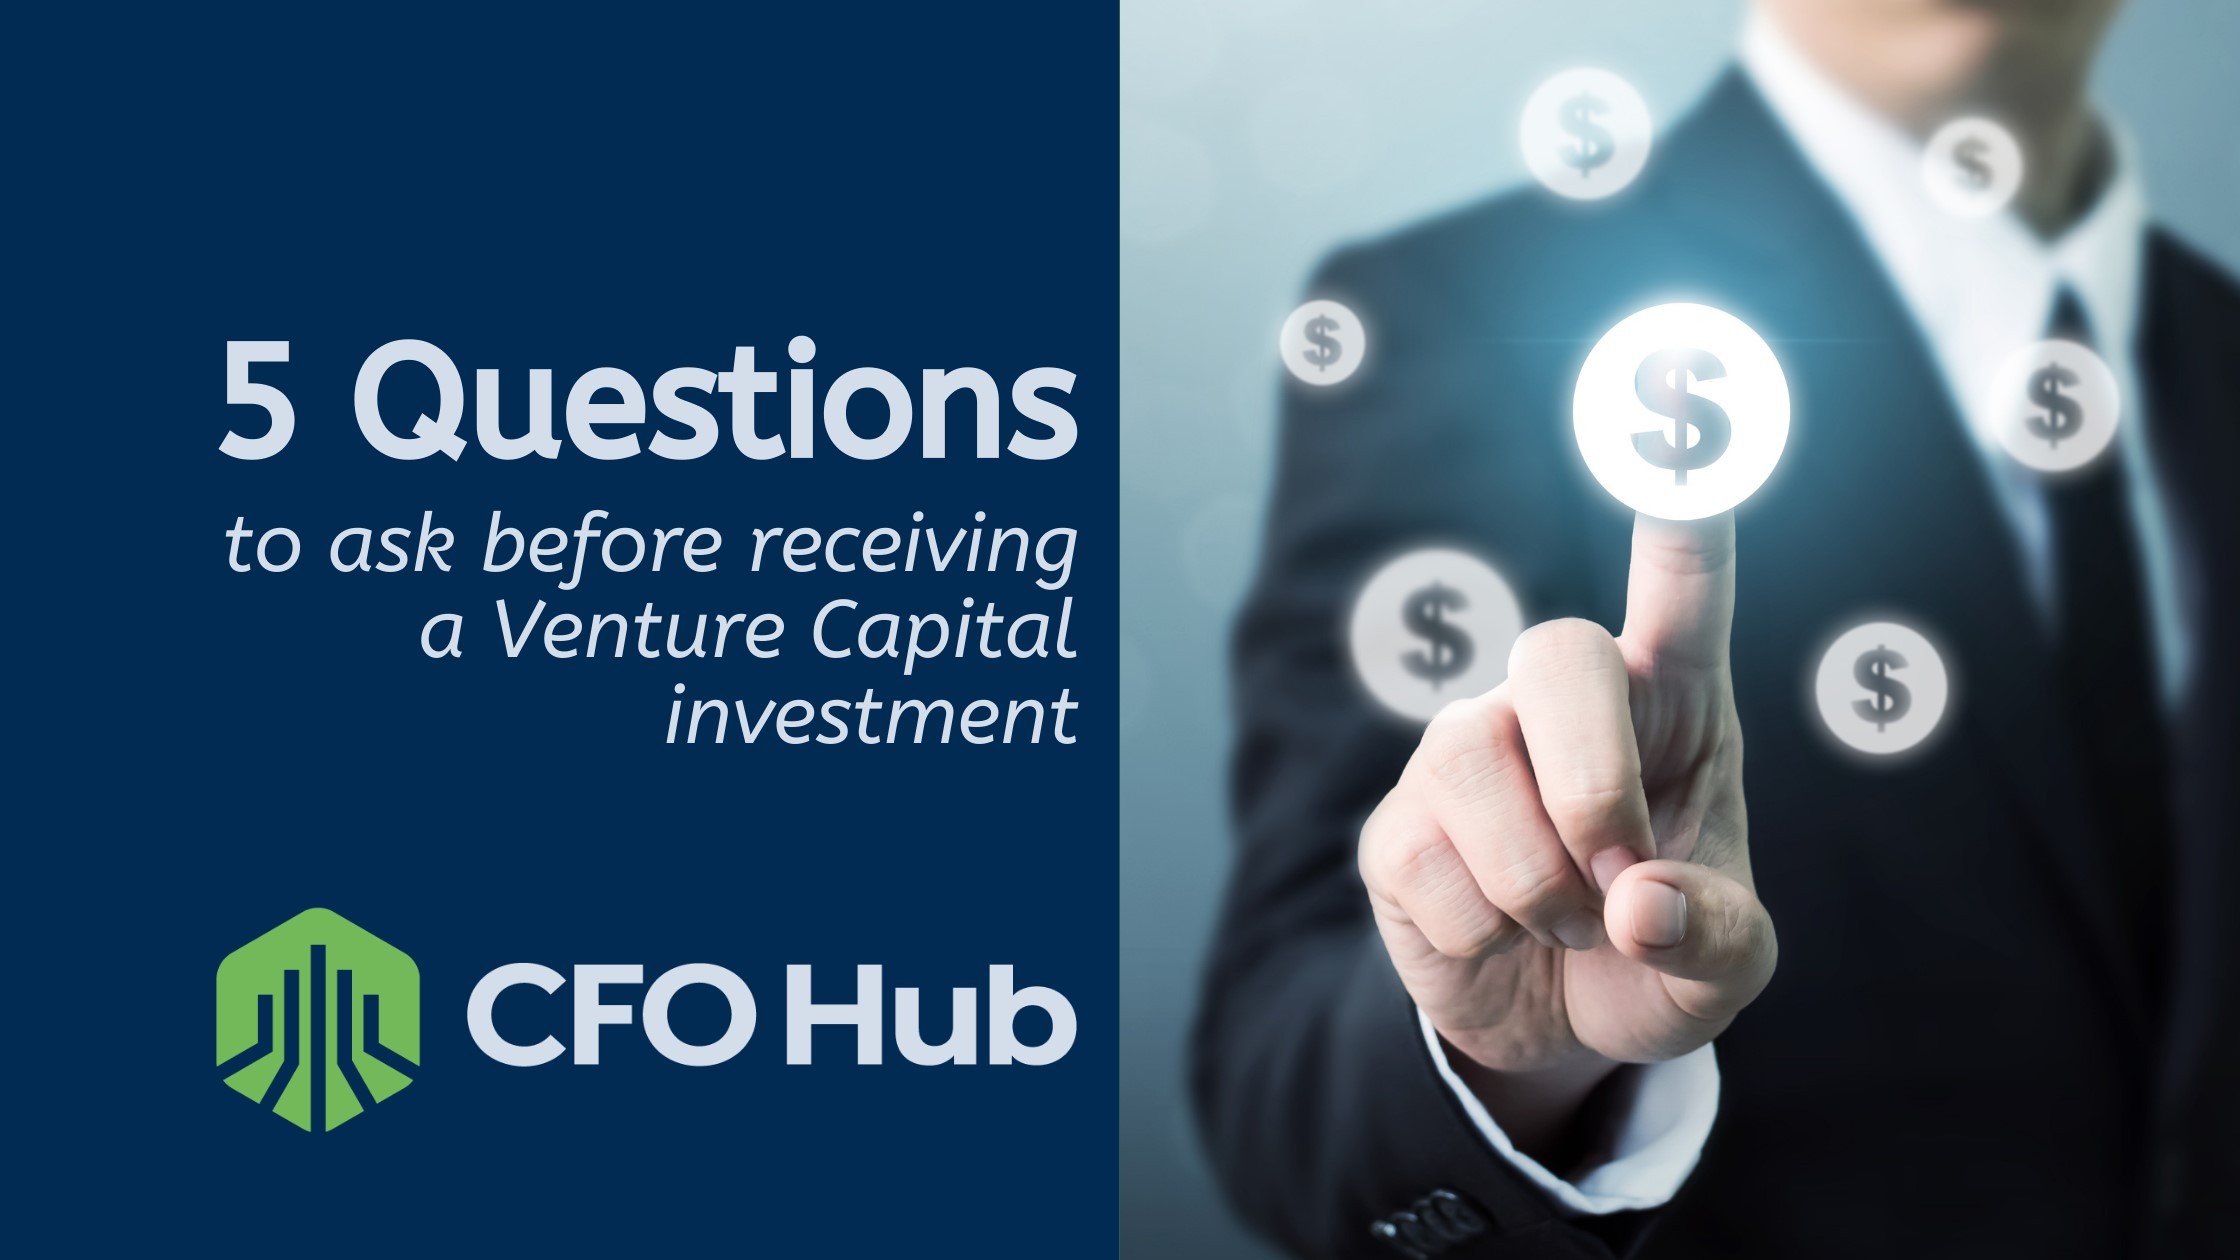 A person in a suit is touching a glowing dollar sign icon on a transparent screen, with multiple floating dollar signs around. The text on the left reads, "5 Questions to Ask Before Receiving Venture Capital." The logo and name "CFO Hub" are at the bottom left.